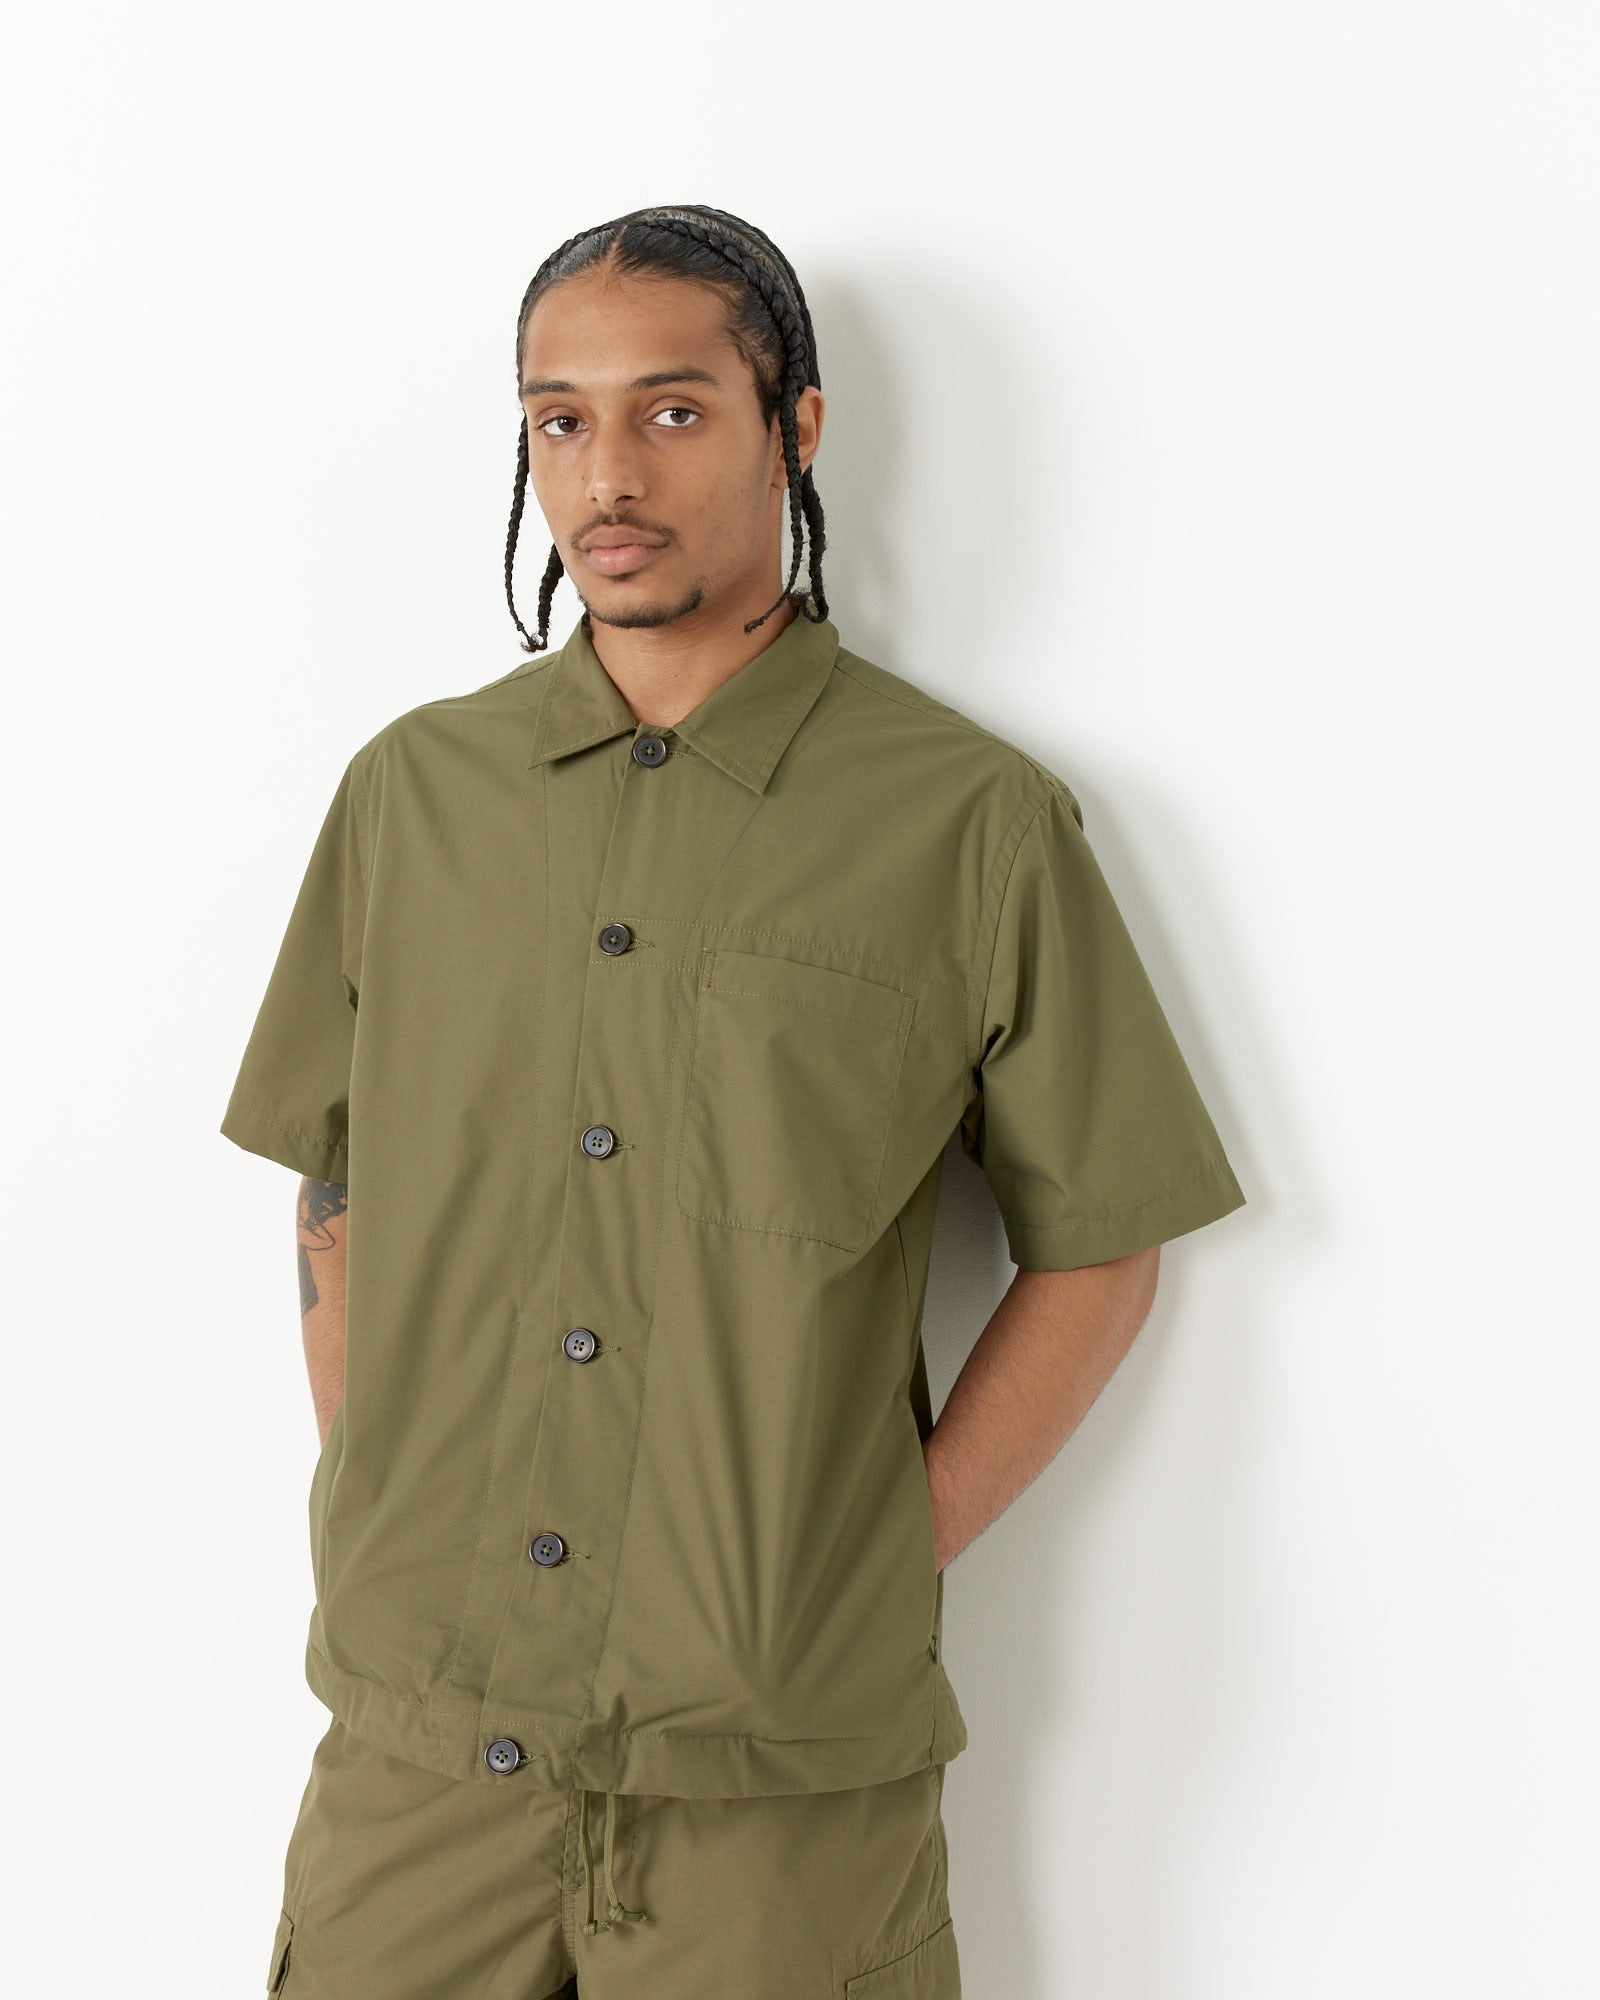 Tech Overshirt in Olive